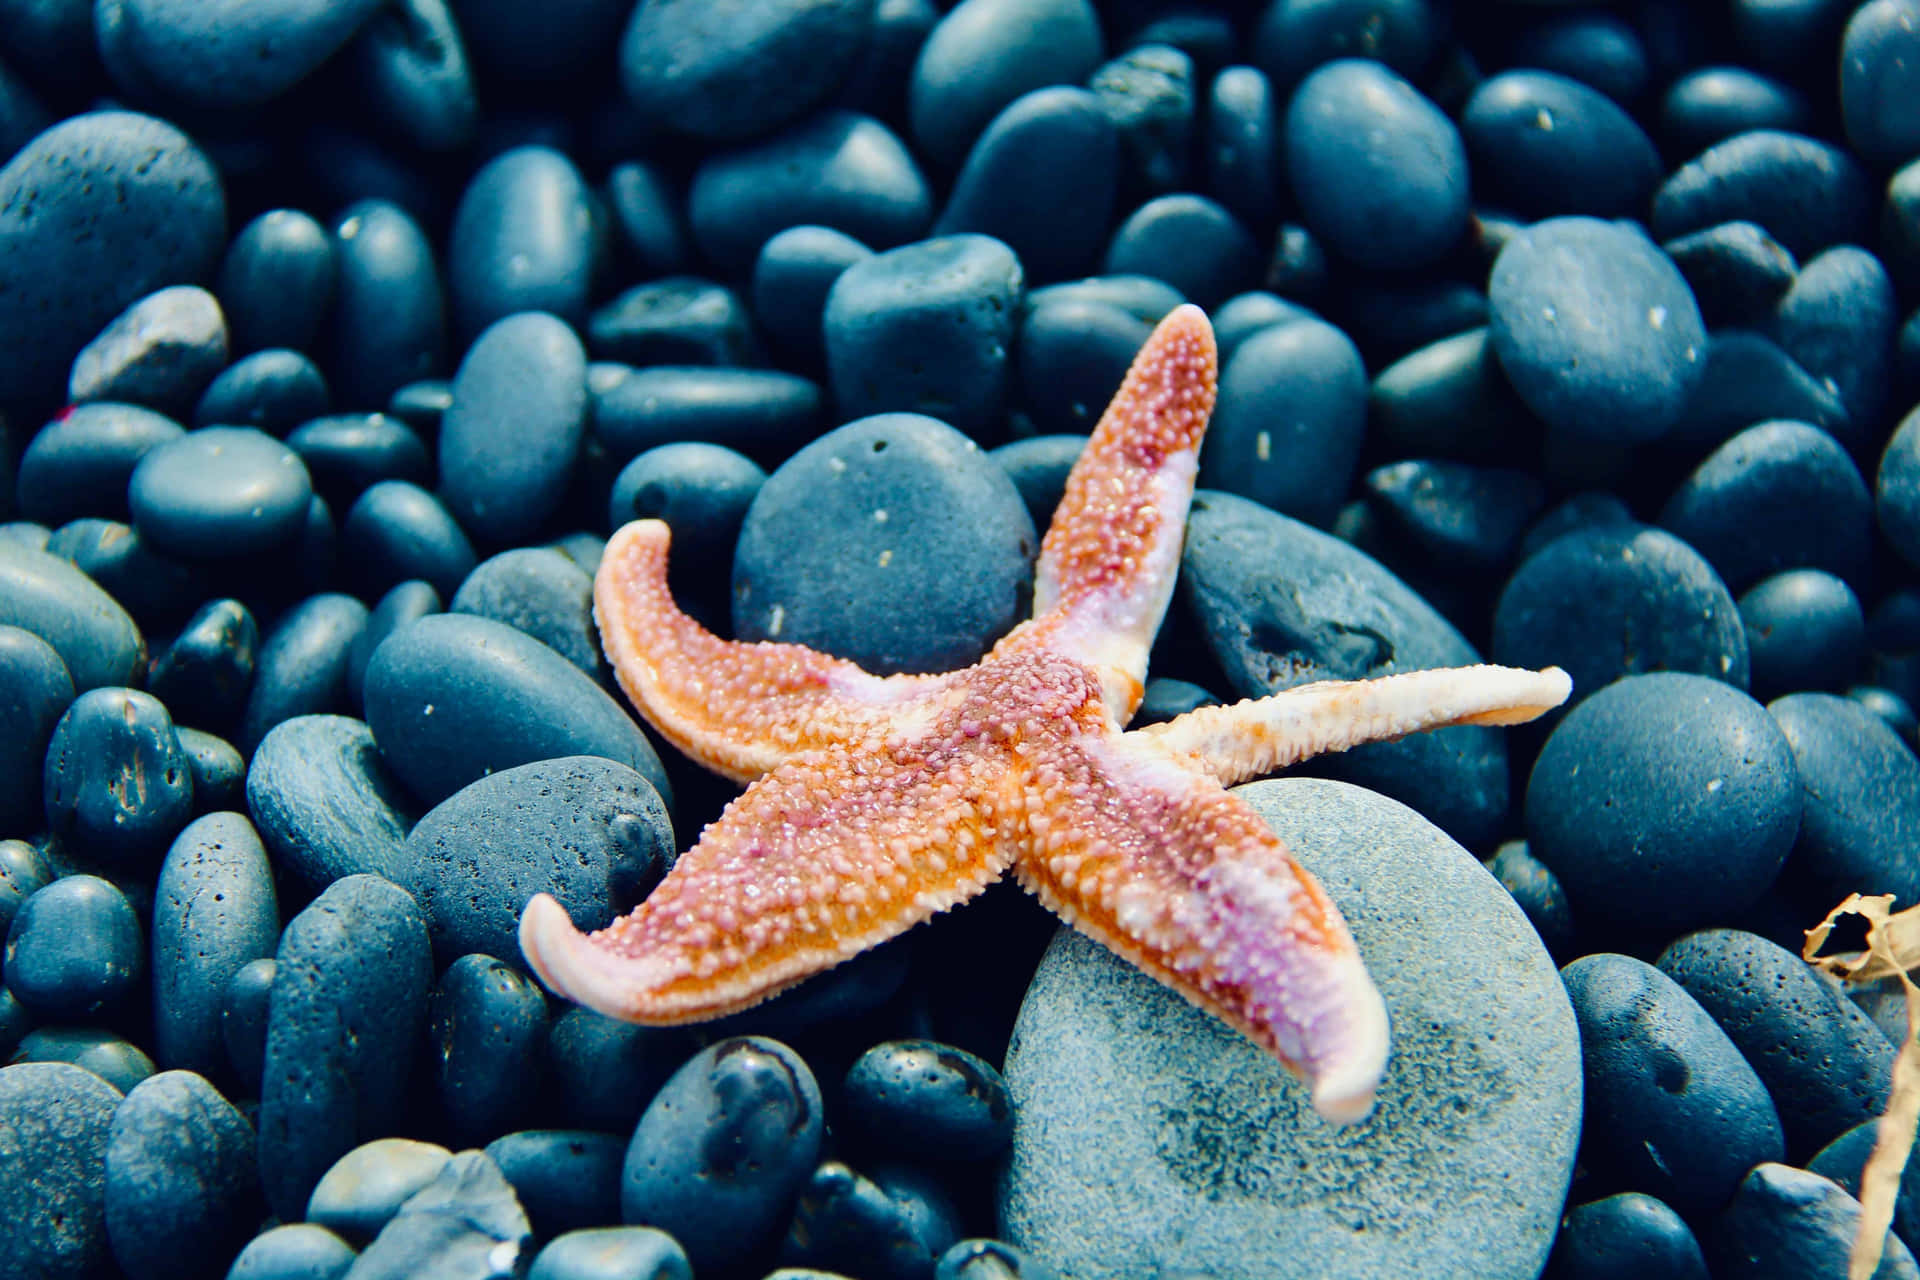 The vibrant beauty of the starfish